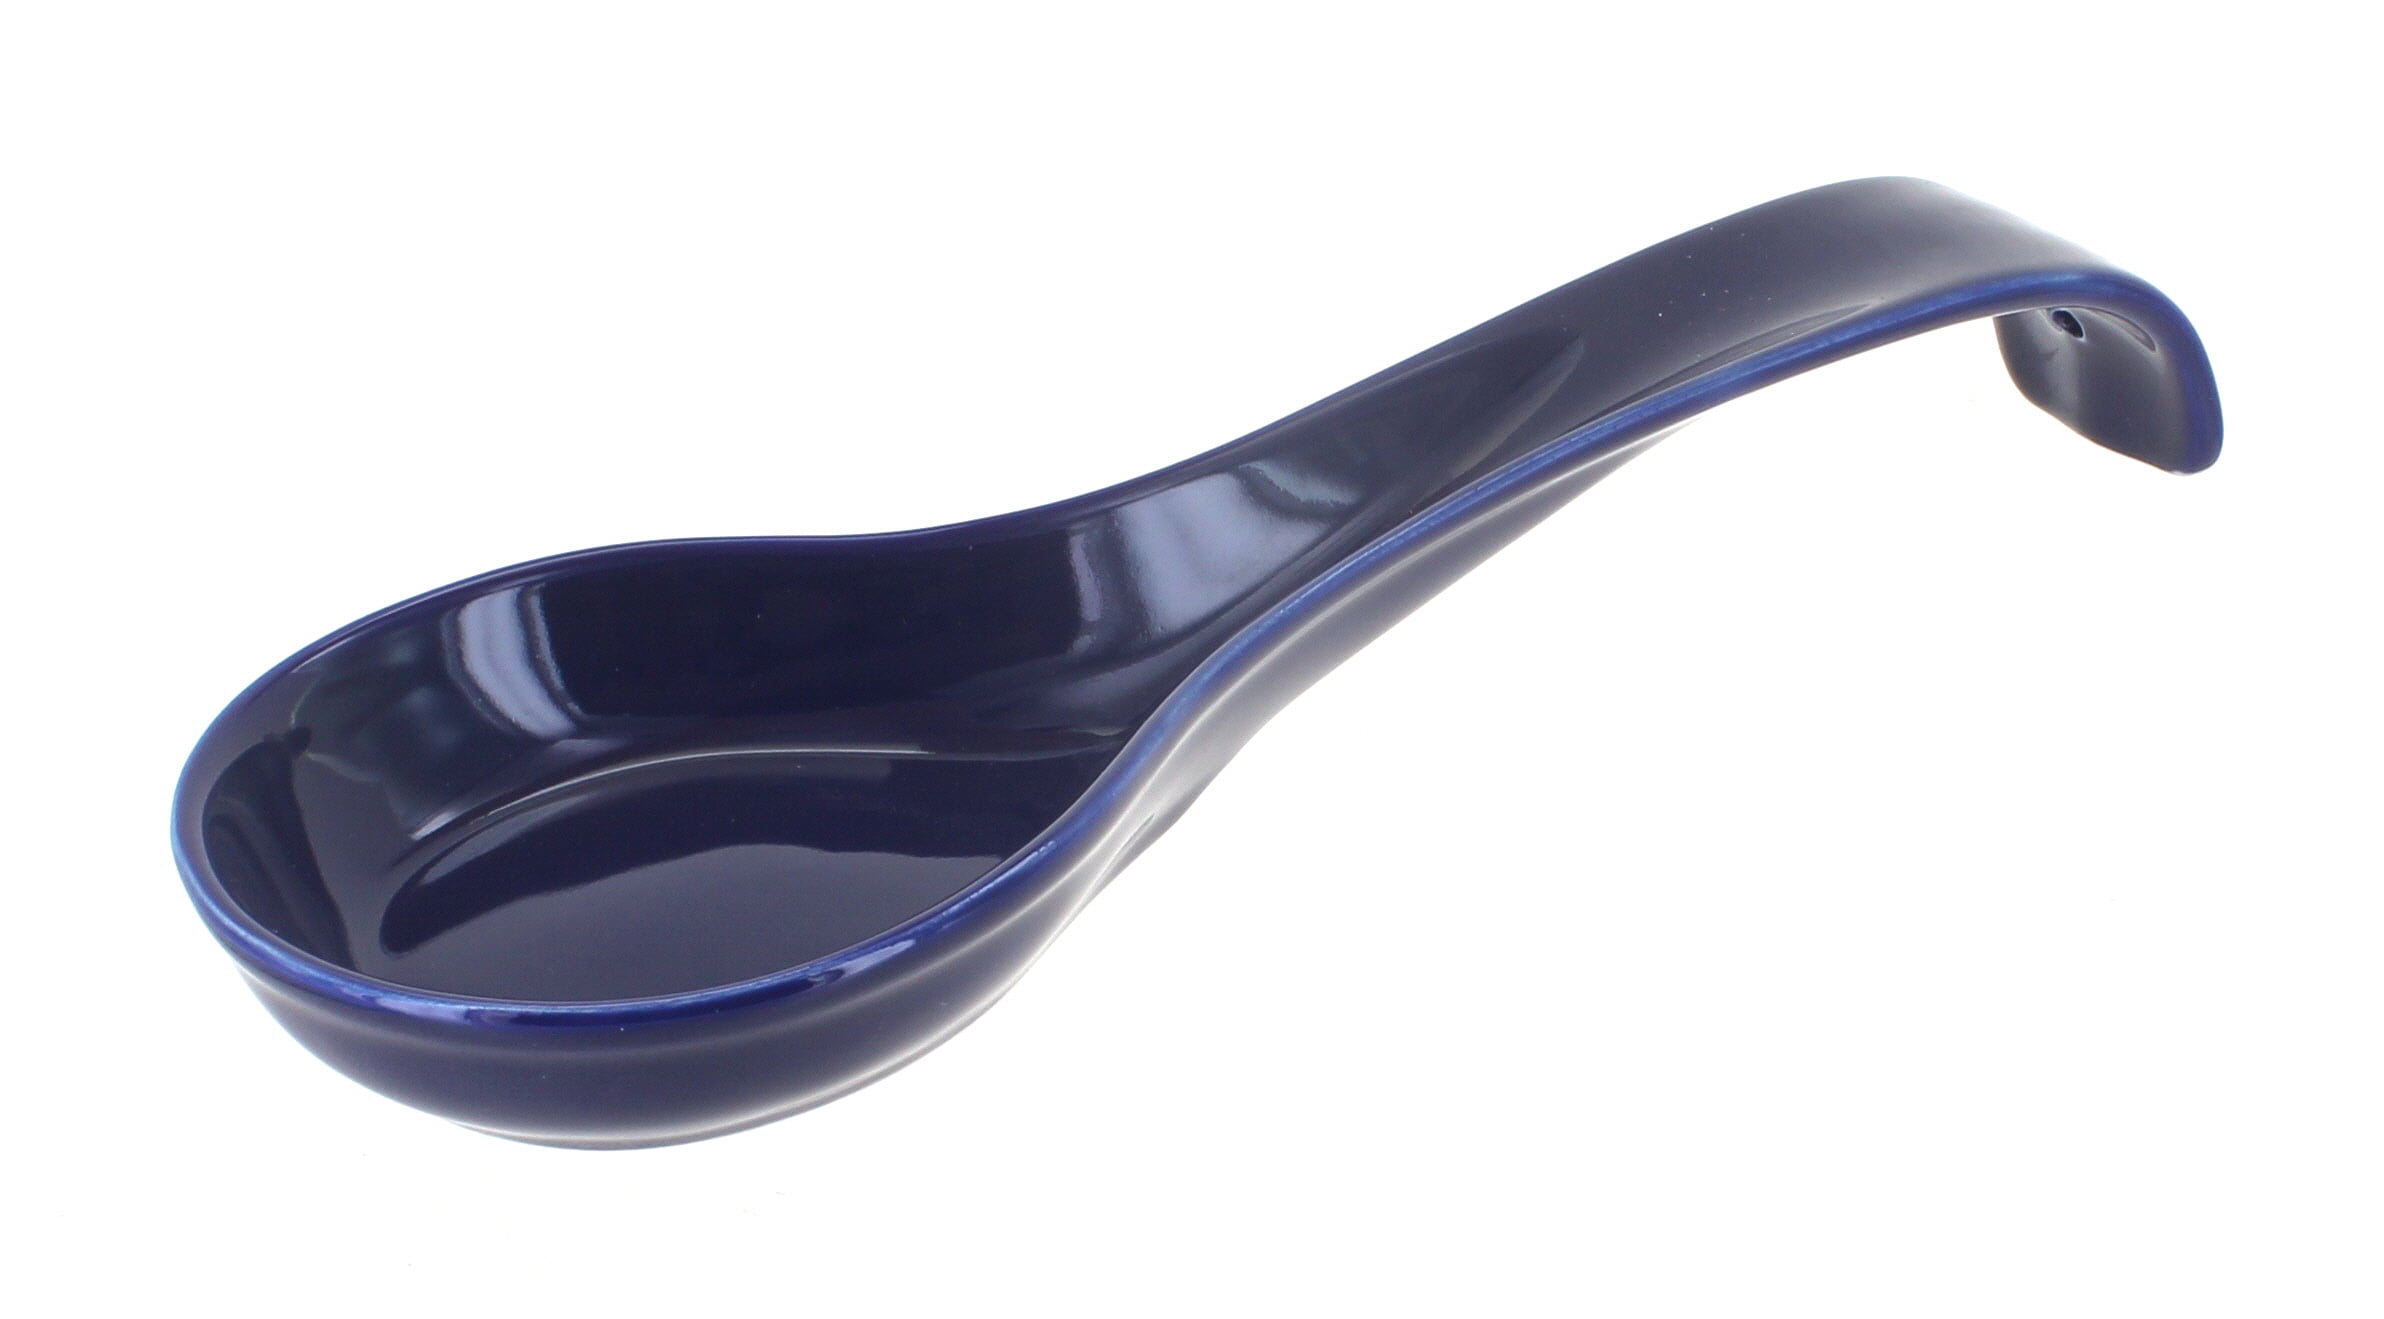 Ceramic Spoon Rest With Blue Cow 5 Long and 3 1/2 Wide at Top 